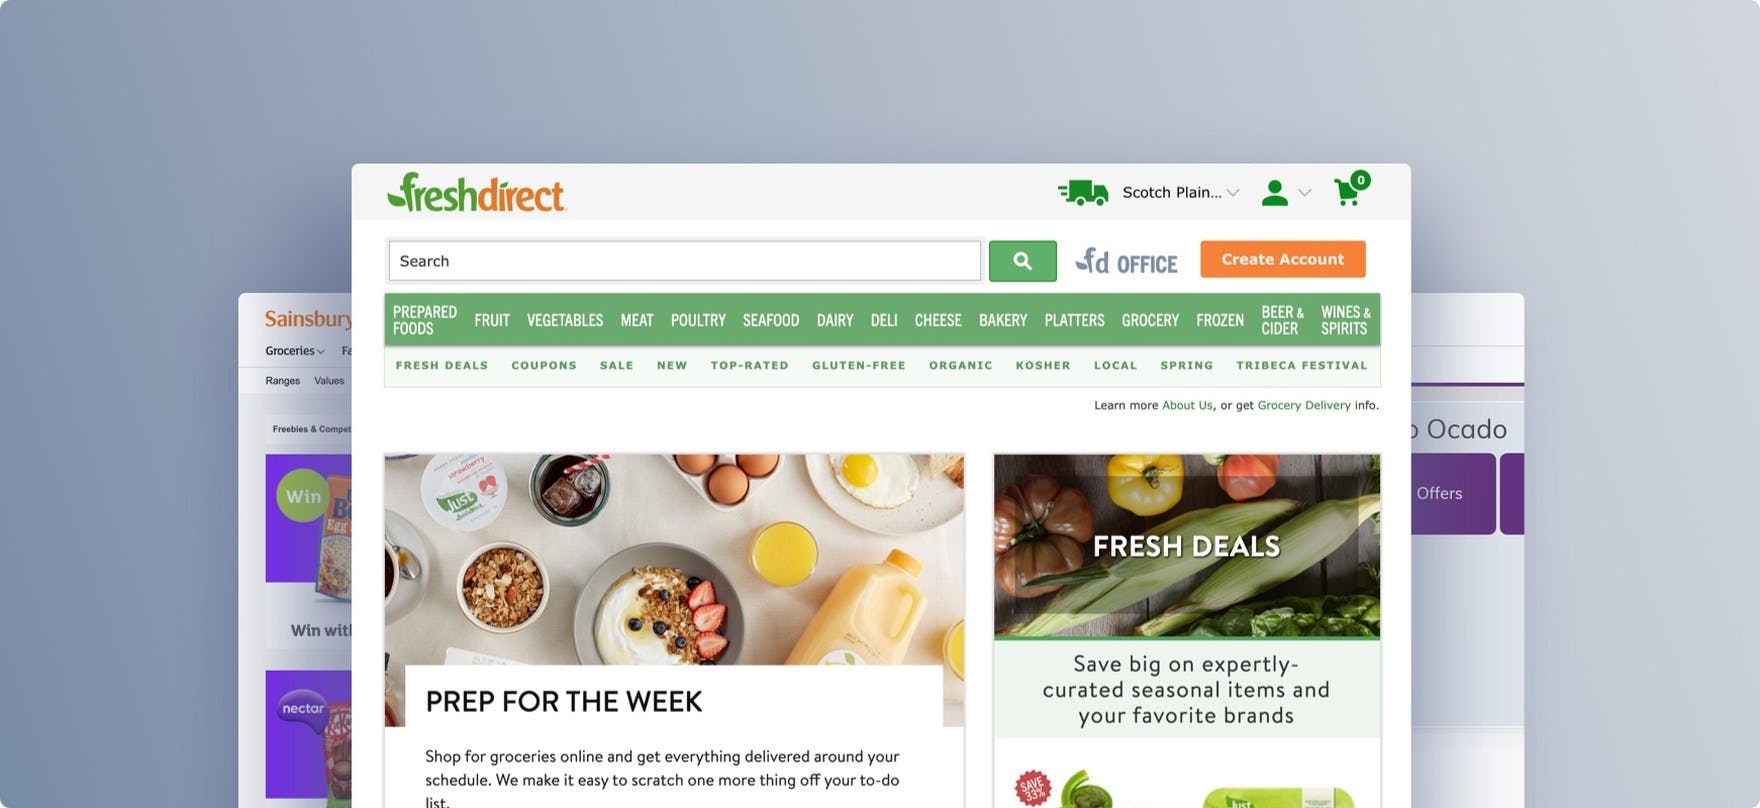 12 Common UX Pitfalls 'Online Grocery' E-Commerce Sites Suffer